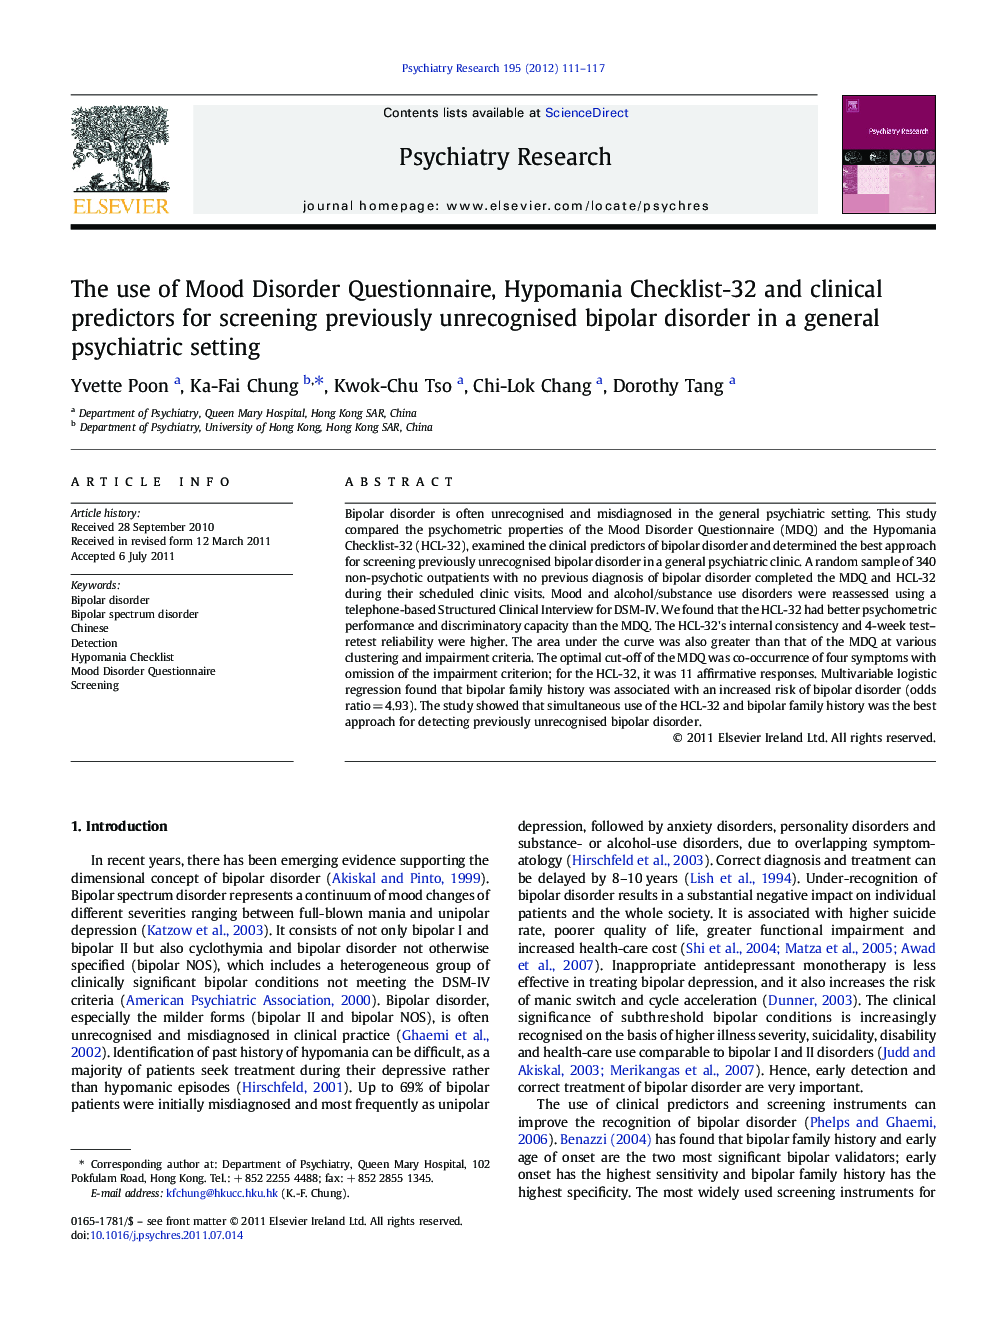 The use of Mood Disorder Questionnaire, Hypomania Checklist-32 and clinical predictors for screening previously unrecognised bipolar disorder in a general psychiatric setting